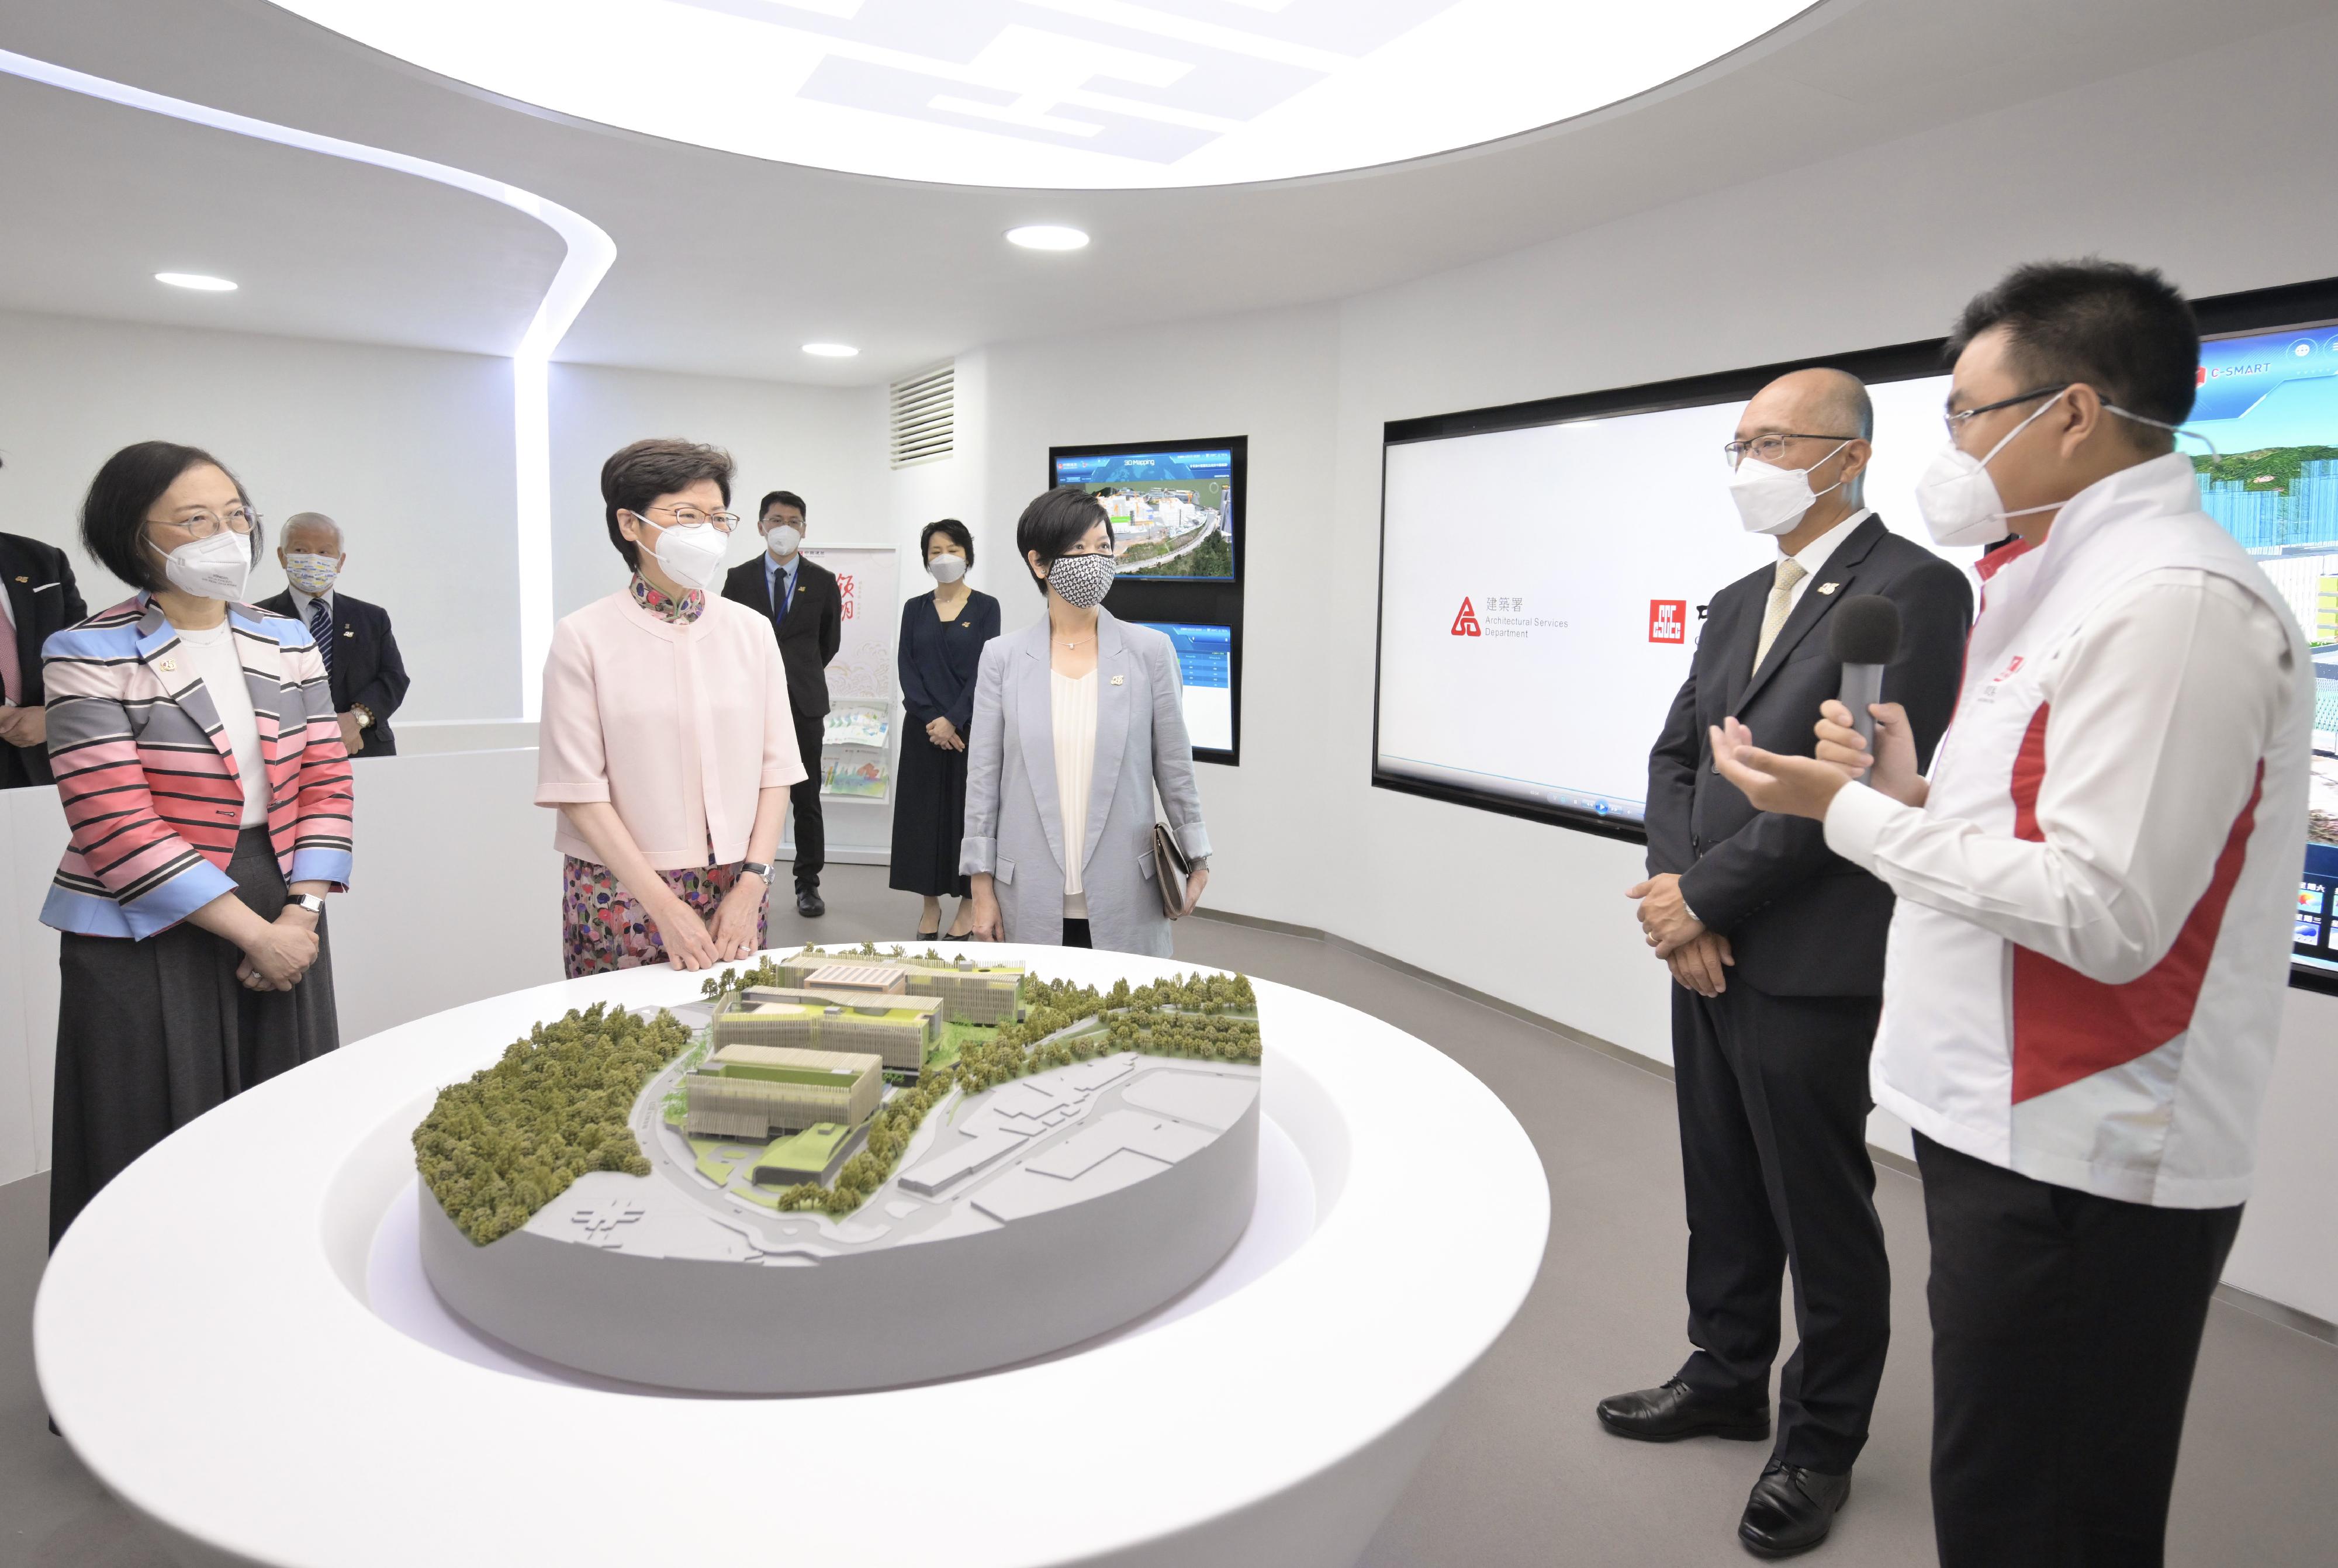 The Chief Executive, Mrs Carrie Lam, attended the Groundbreaking Ceremony of the Chinese Medicine Hospital and the Government Chinese Medicines Testing Institute today (June 2). Photo shows Mrs Lam (second left), accompanied by the Secretary for Food and Health, Professor Sophia Chan (first left), and the Director of Architectural Services, Ms Winnie Ho (third left), receiving a briefing from Executive Director and Vice President of China State Construction International Holdings Limited Mr Hung Cheung-shew (second right), and a staff member on the architectural features of the project.